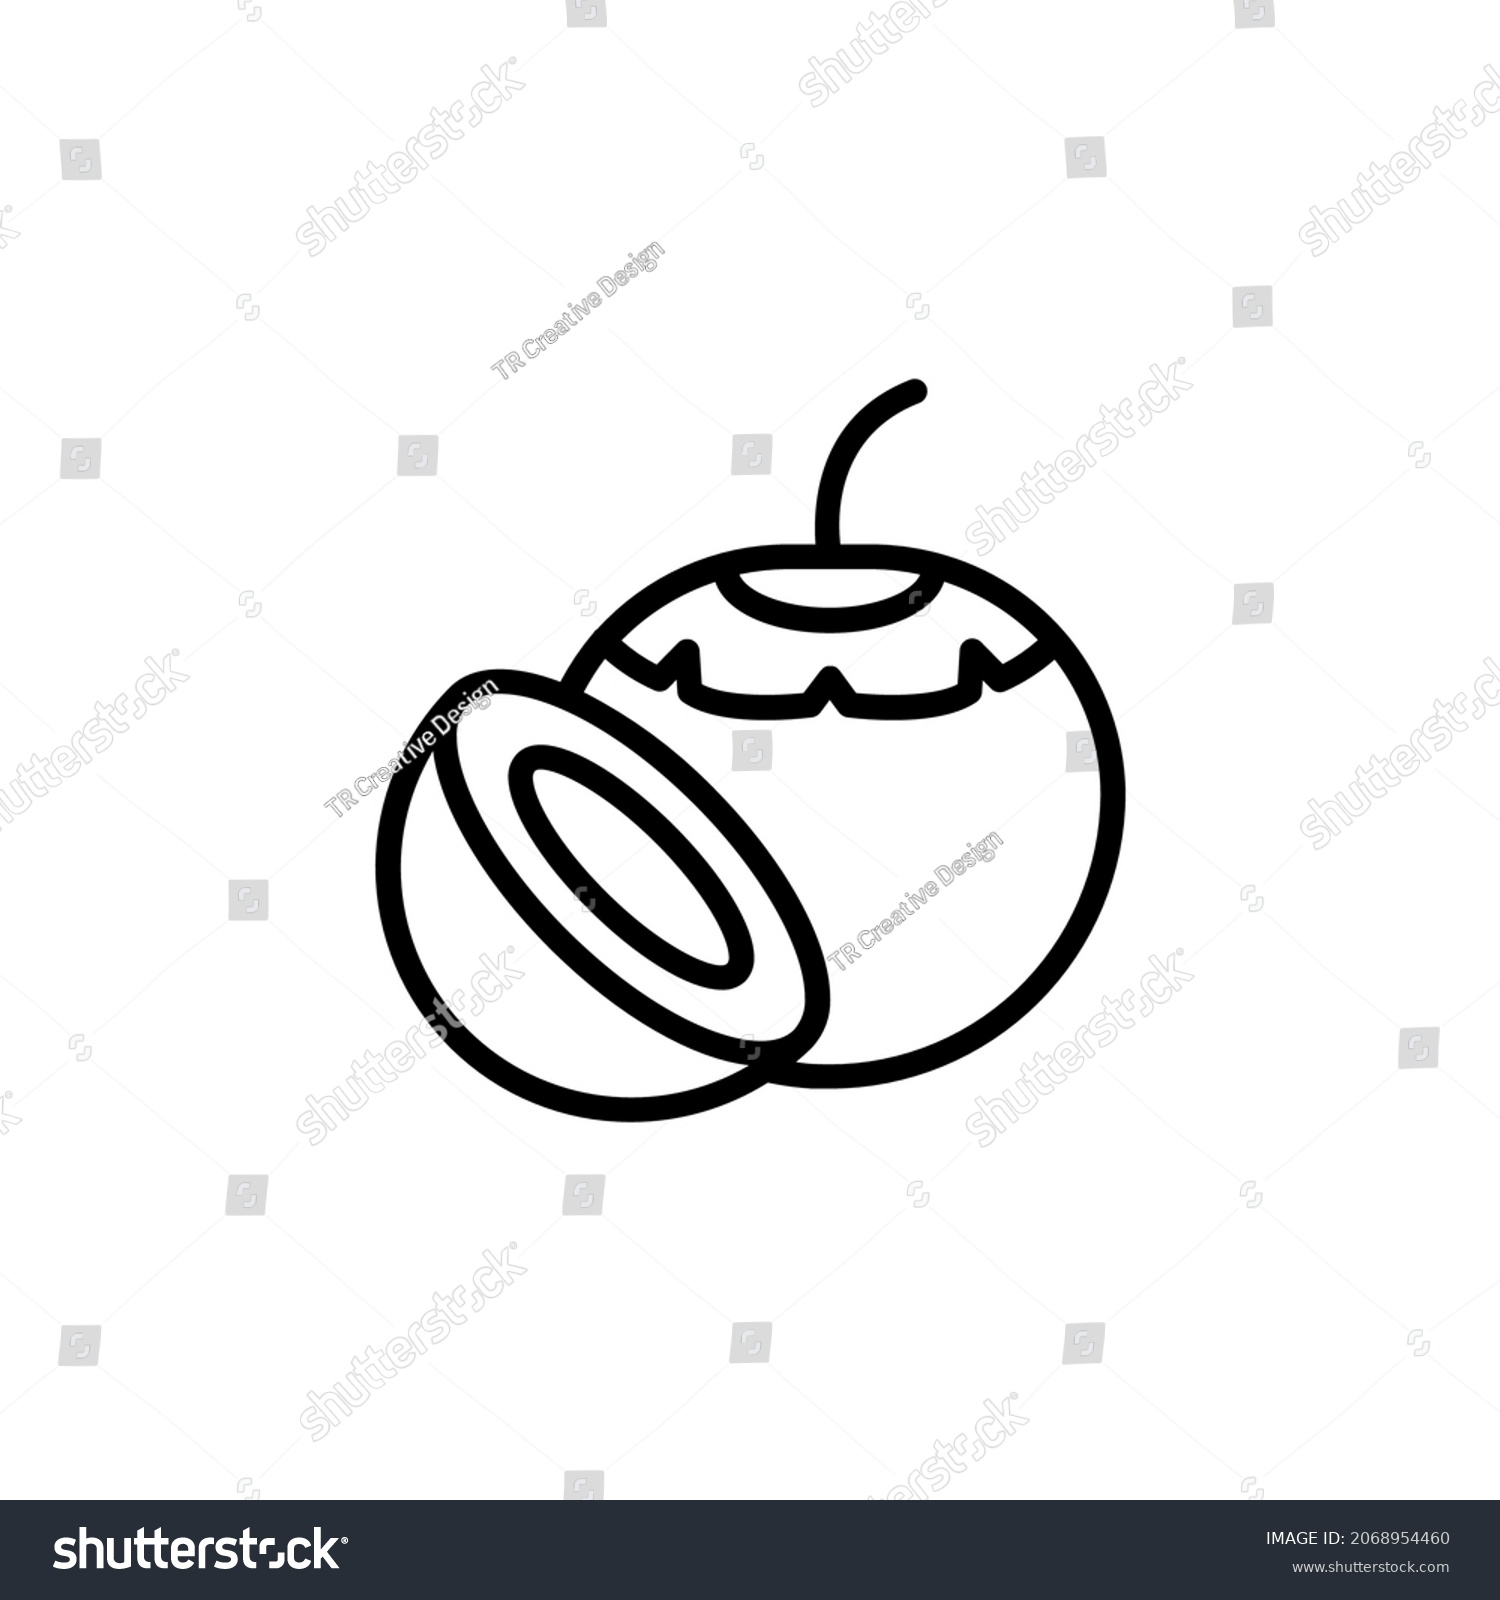 SVG of coconut vector icon. fruit icon outline style. perfect use for icon, logo, illustration, website, and more. icon design line style svg